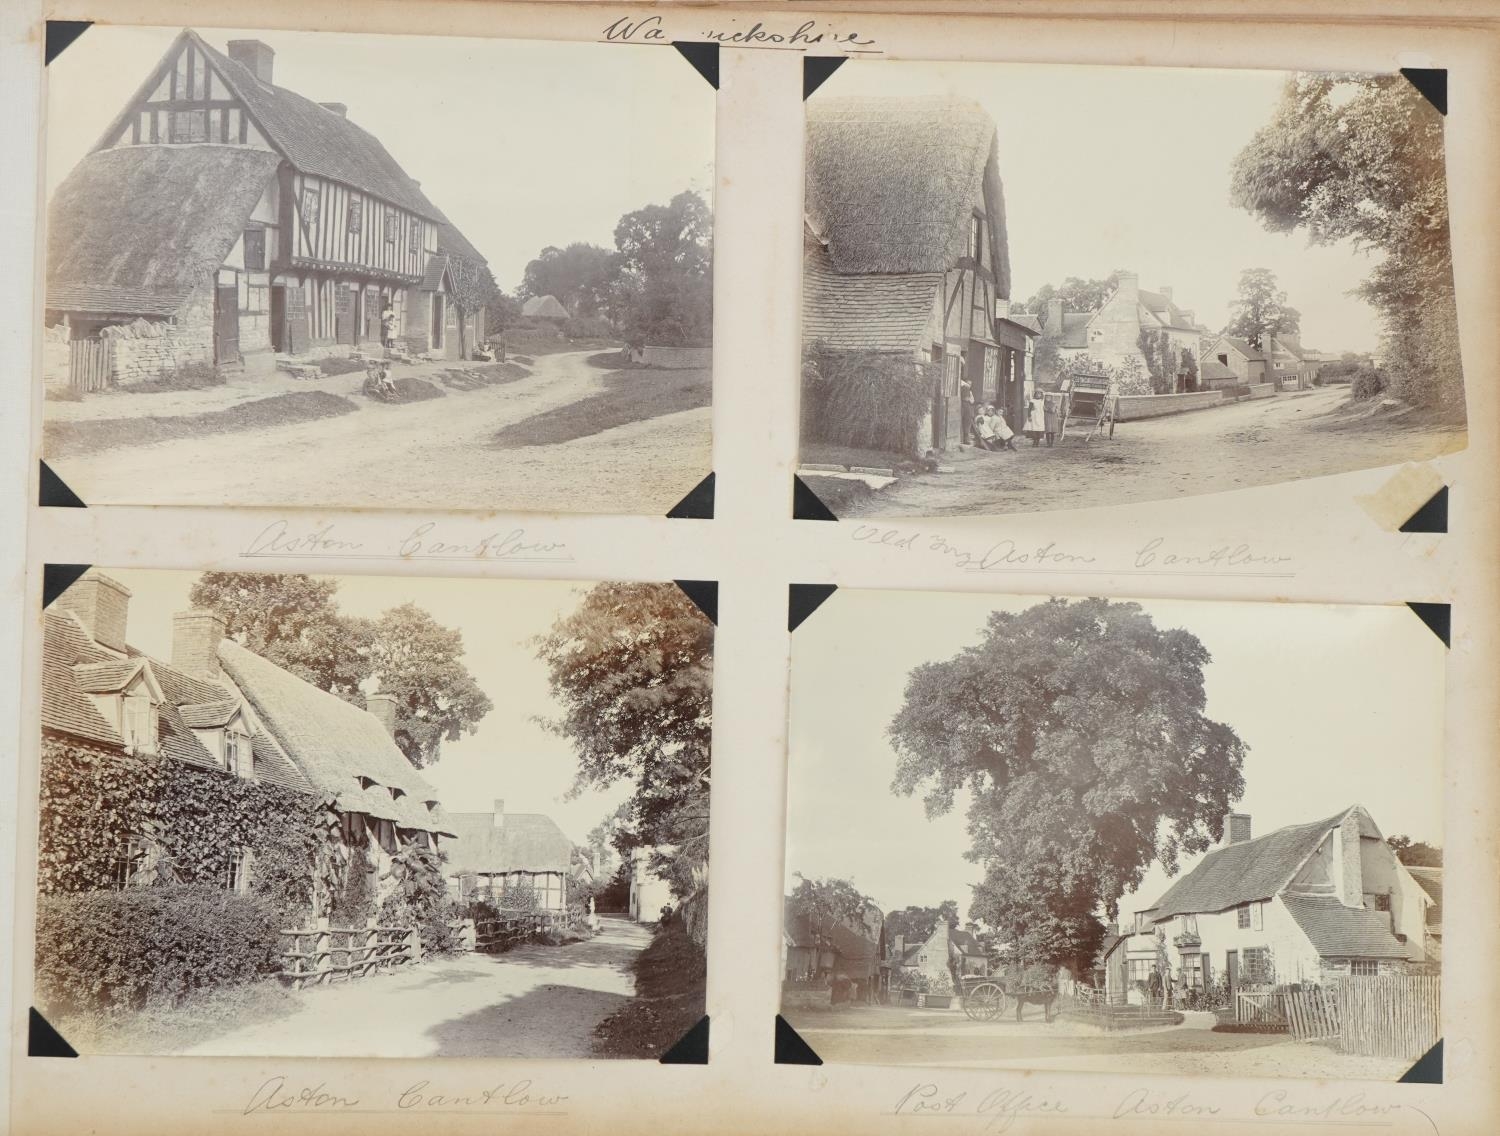 Early 20th century black and white photographs arranged in an album including Staffordshire, - Image 15 of 40